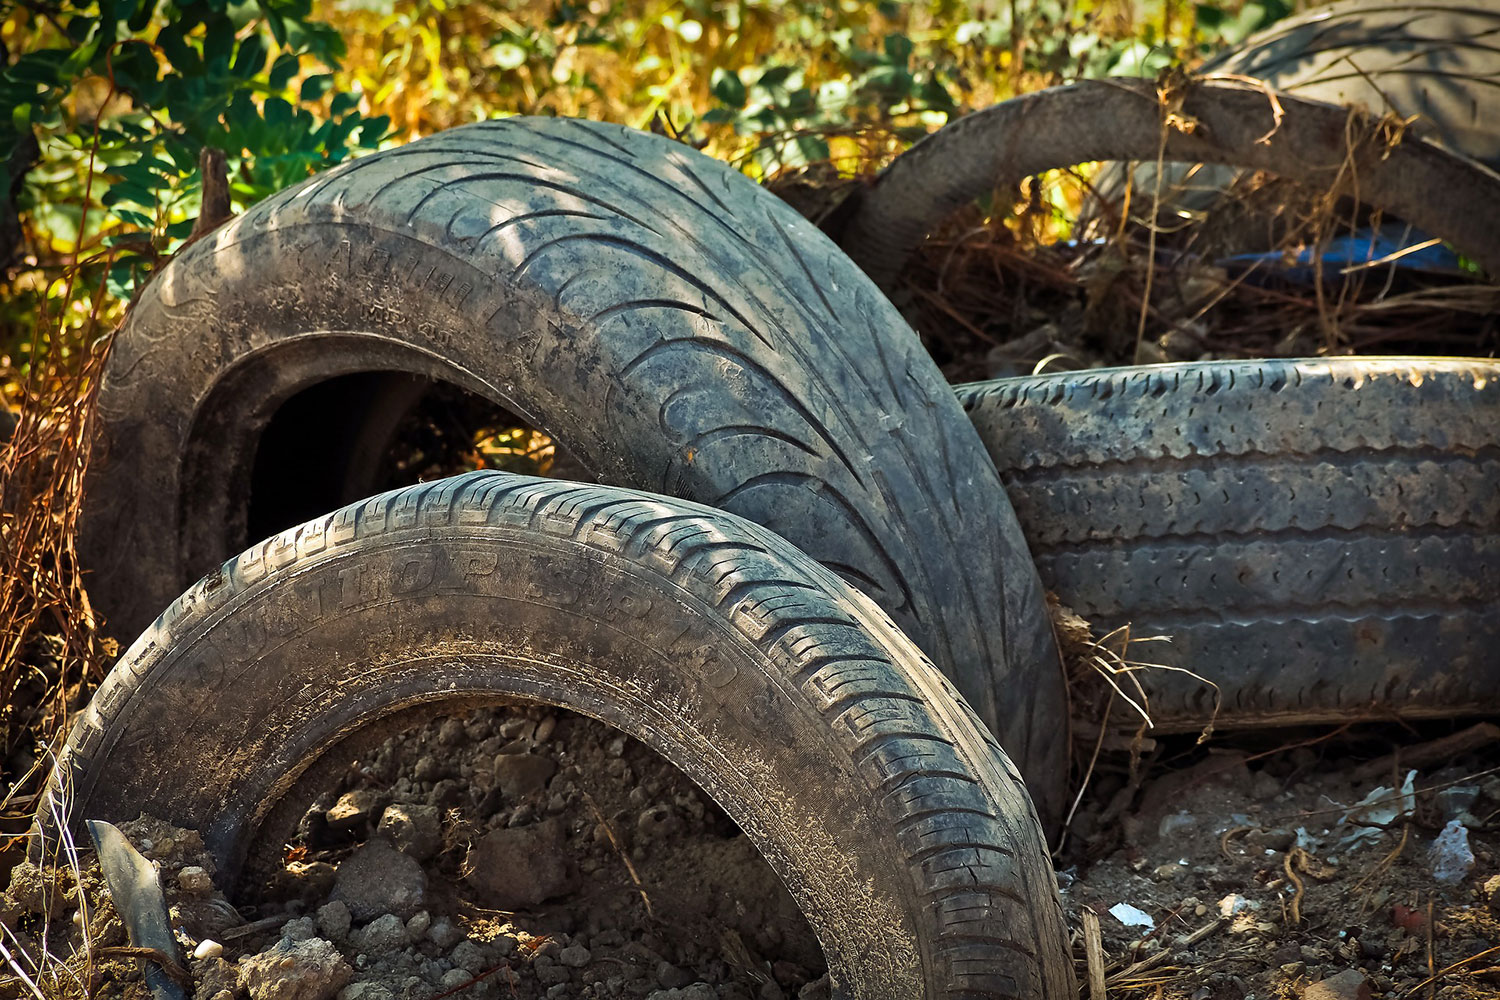 Concrete made from recycled tyres could be a safe, green alternative.